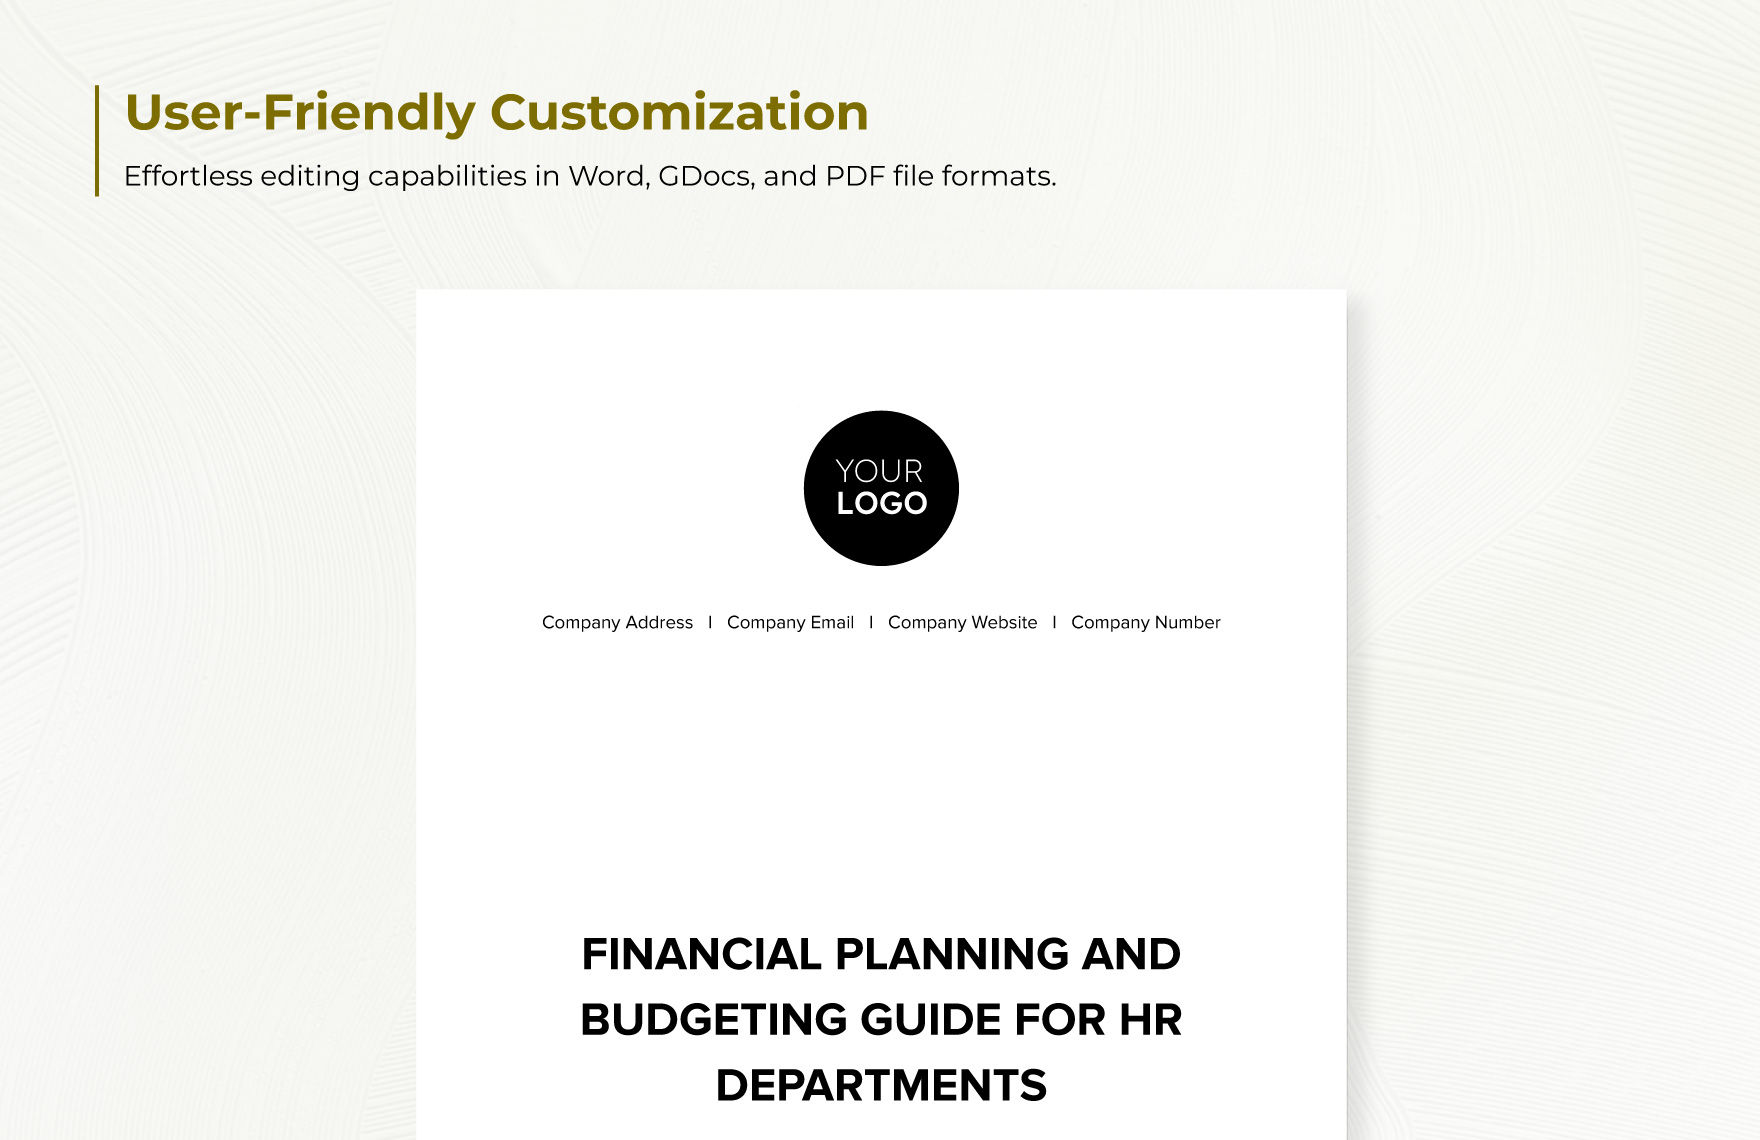 Financial Planning and Budgeting Guide for HR Departments Template